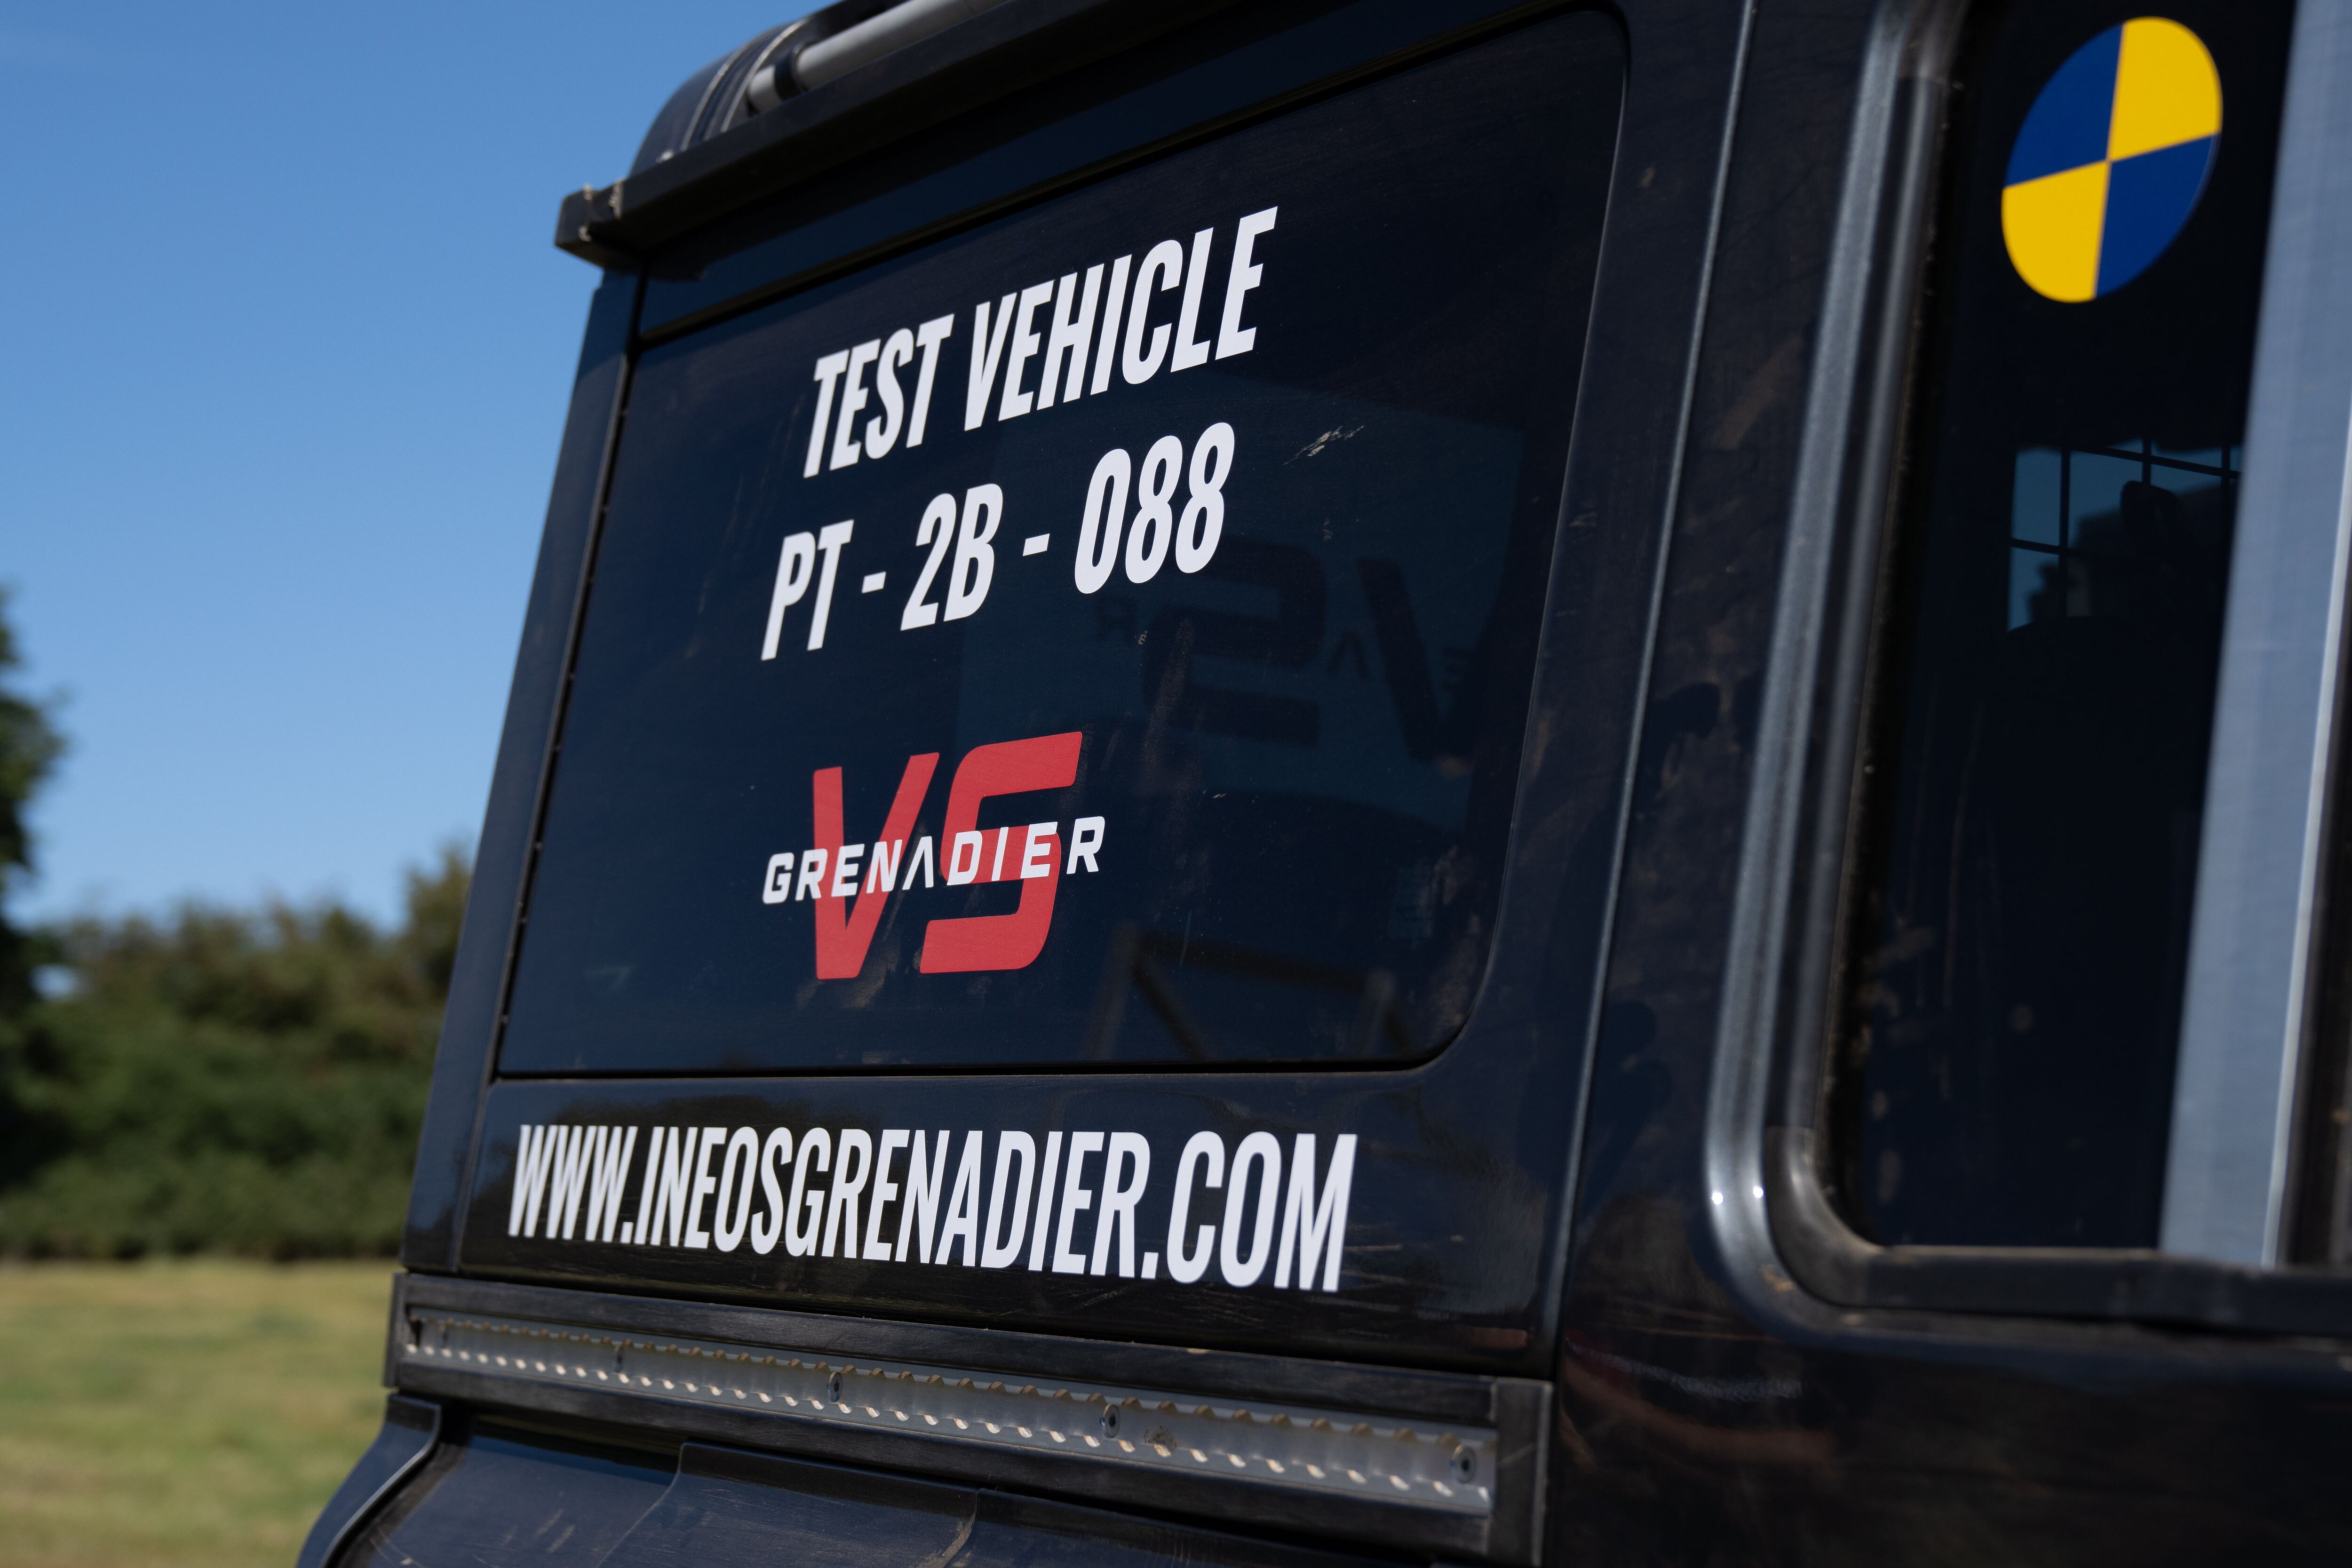 Road testing the Ineos Grenadier 4x4 prototype: what to expect